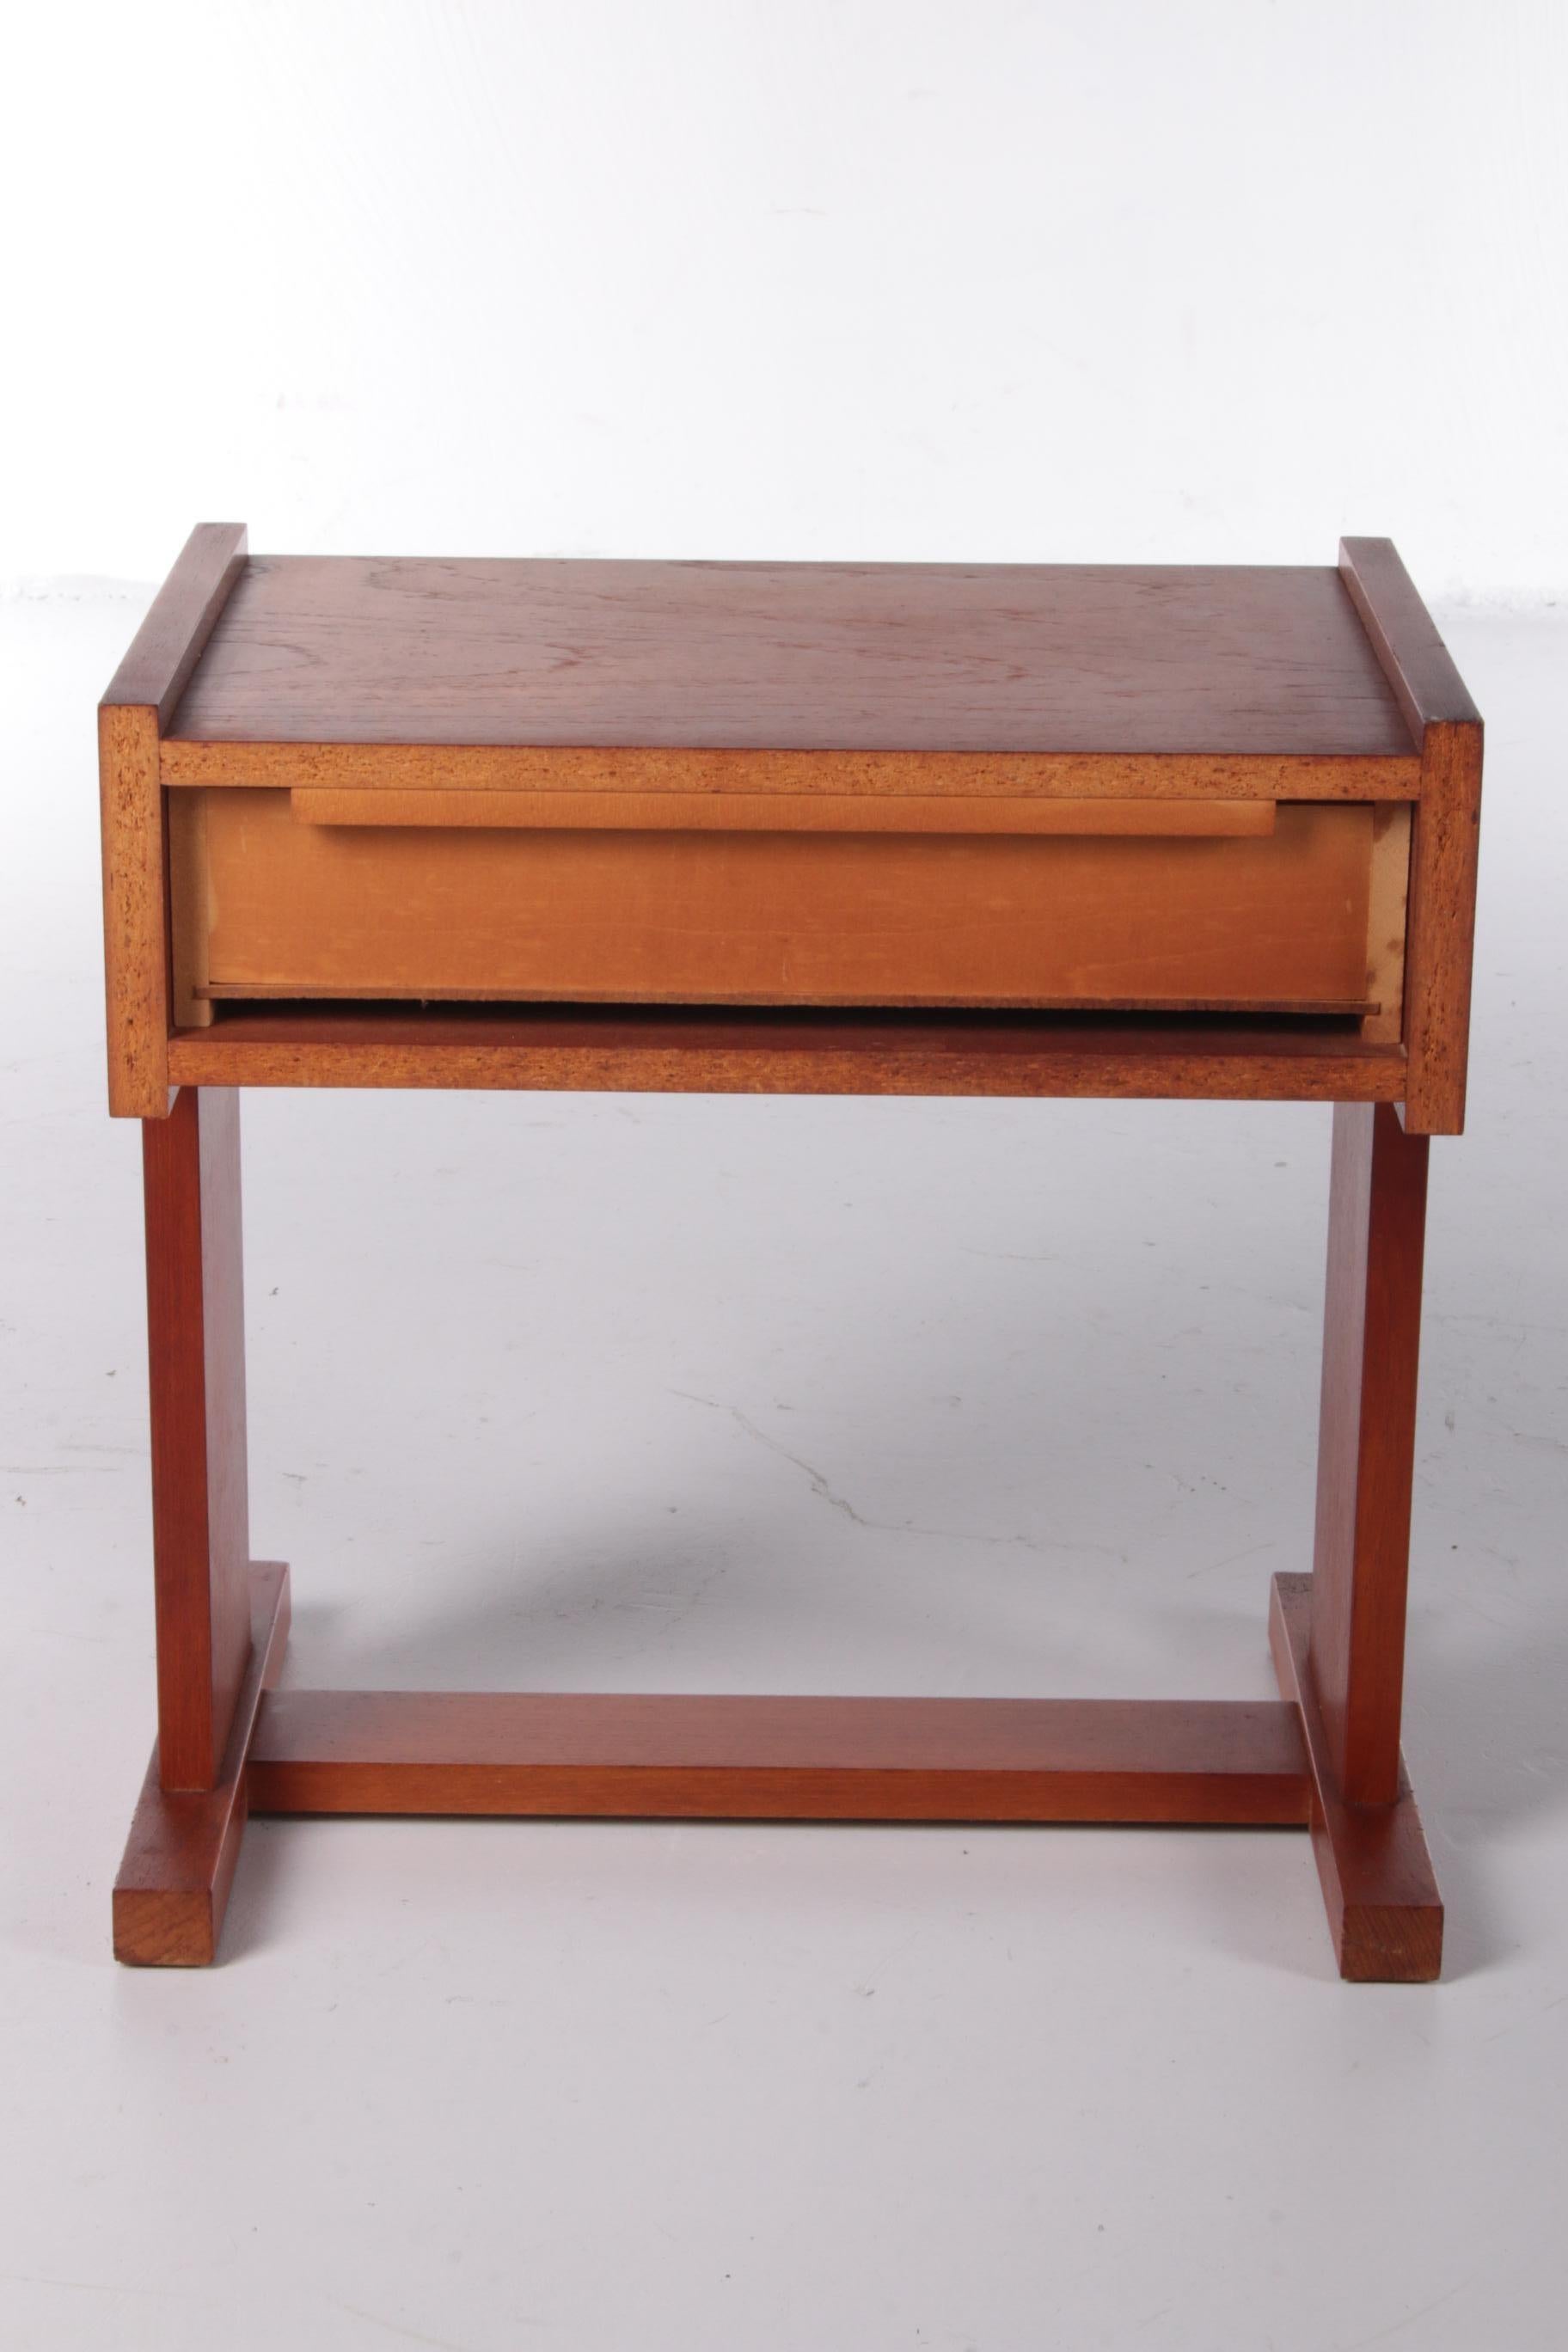 Mid-20th Century Vintage Danish Design Bedside Table with Drawer, 1960s